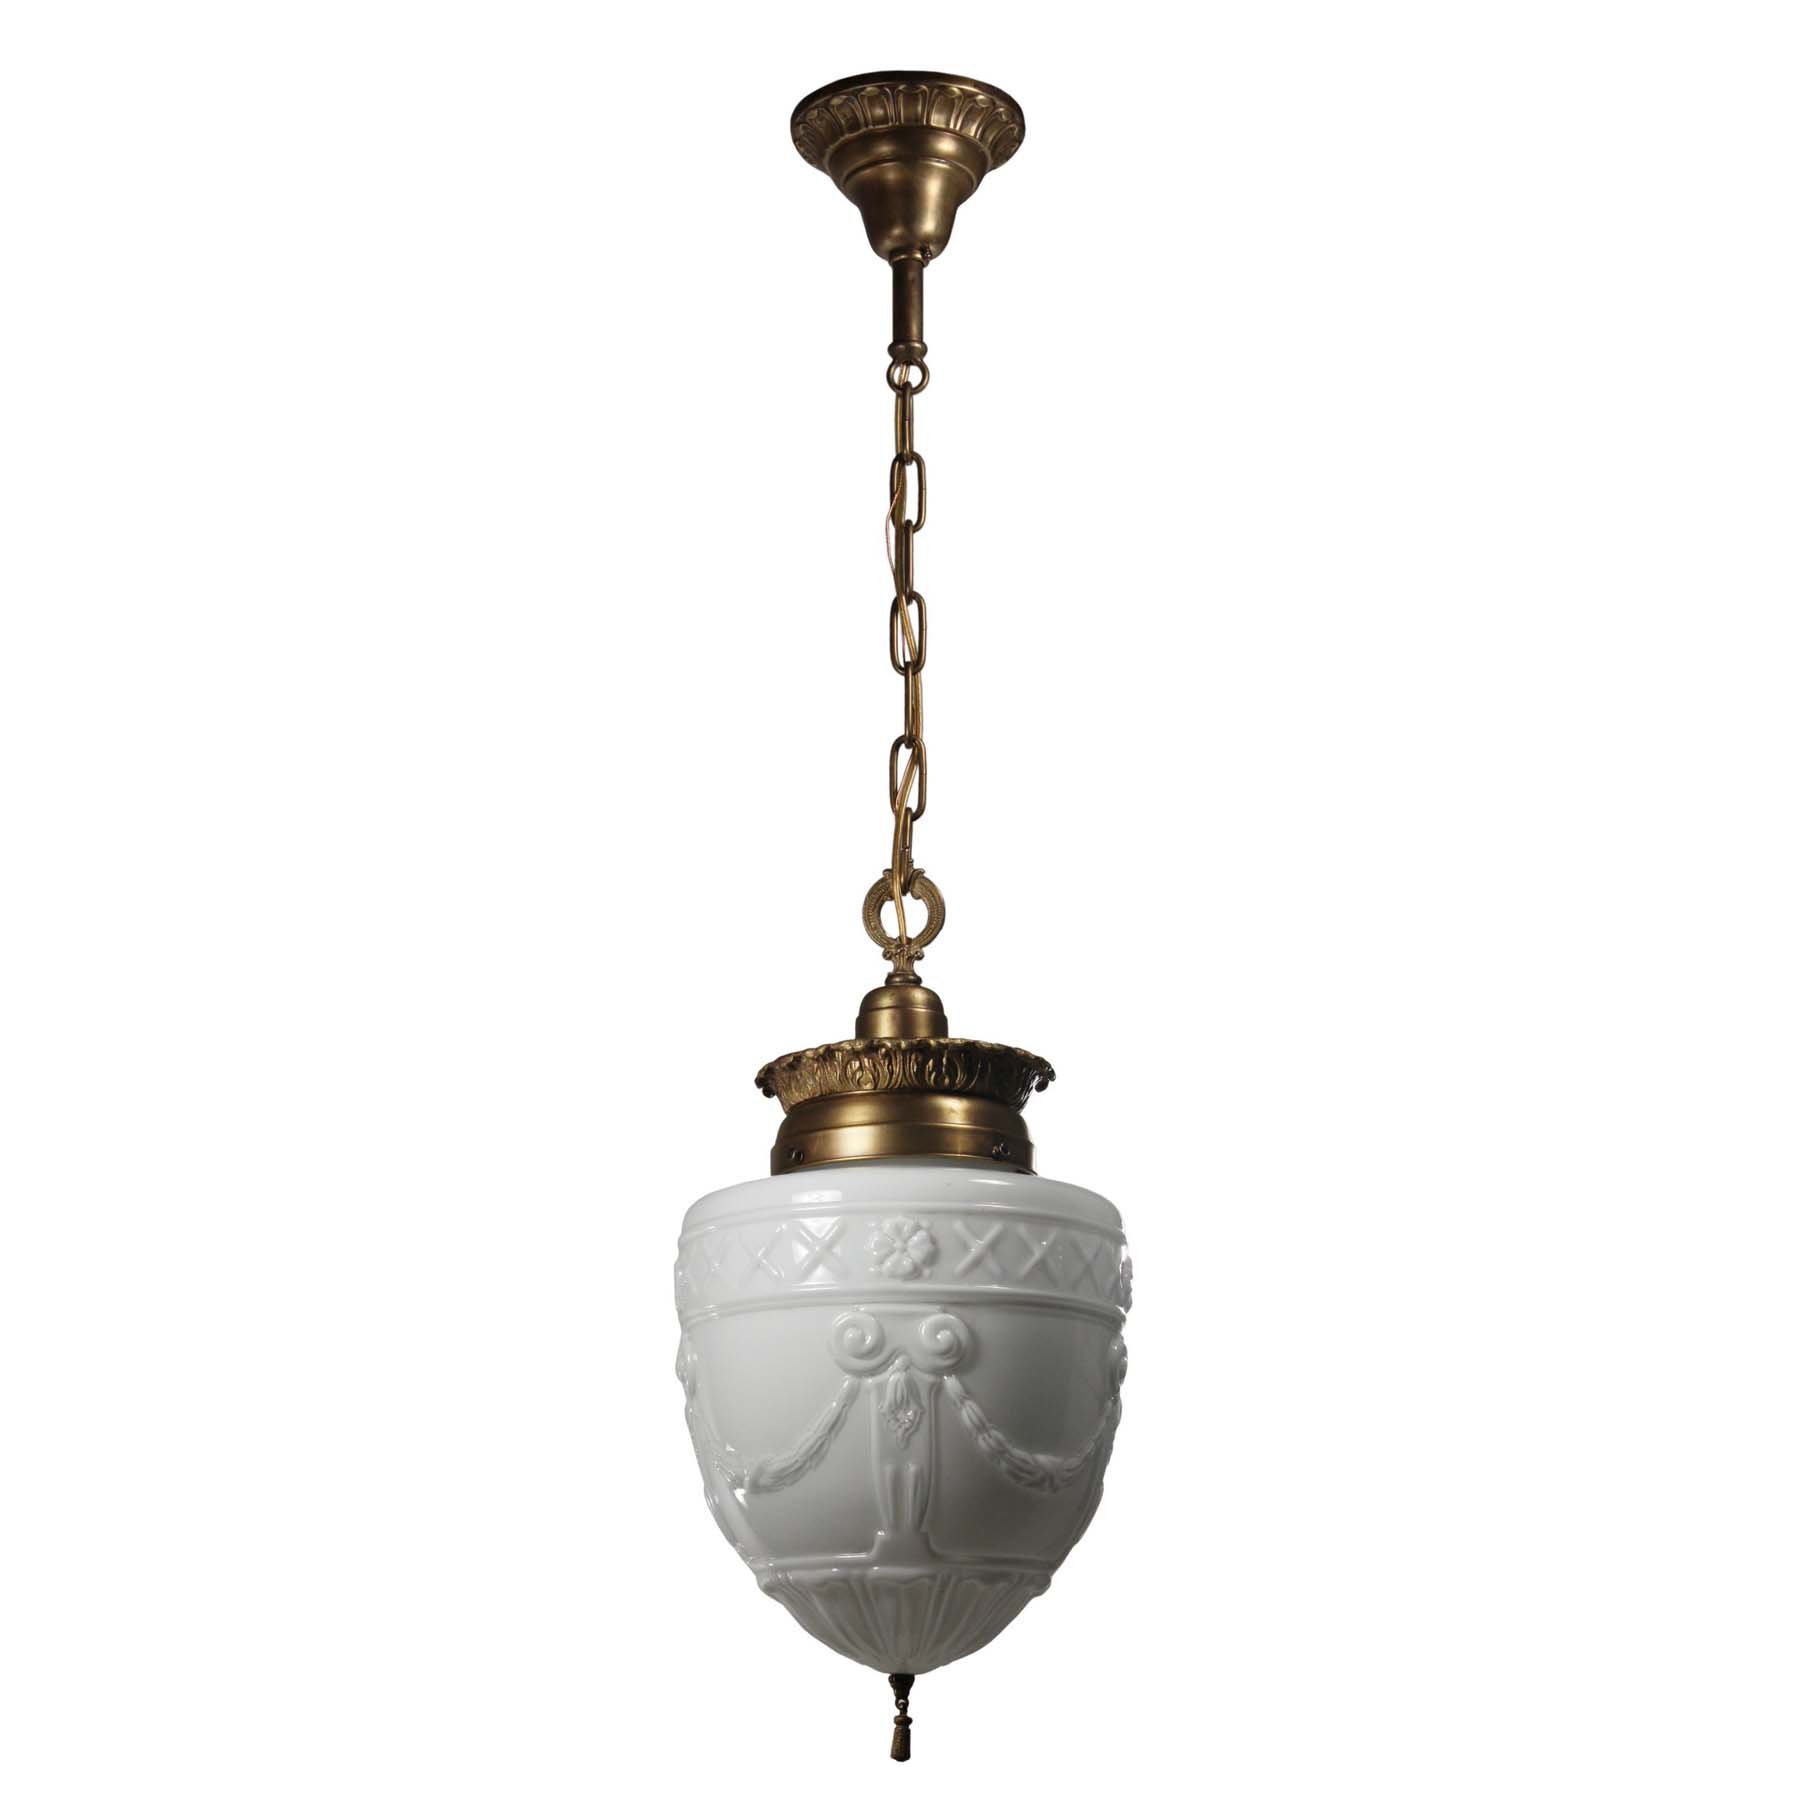 SOLD Antique Neoclassical Pendant Light with Original Shade-67323